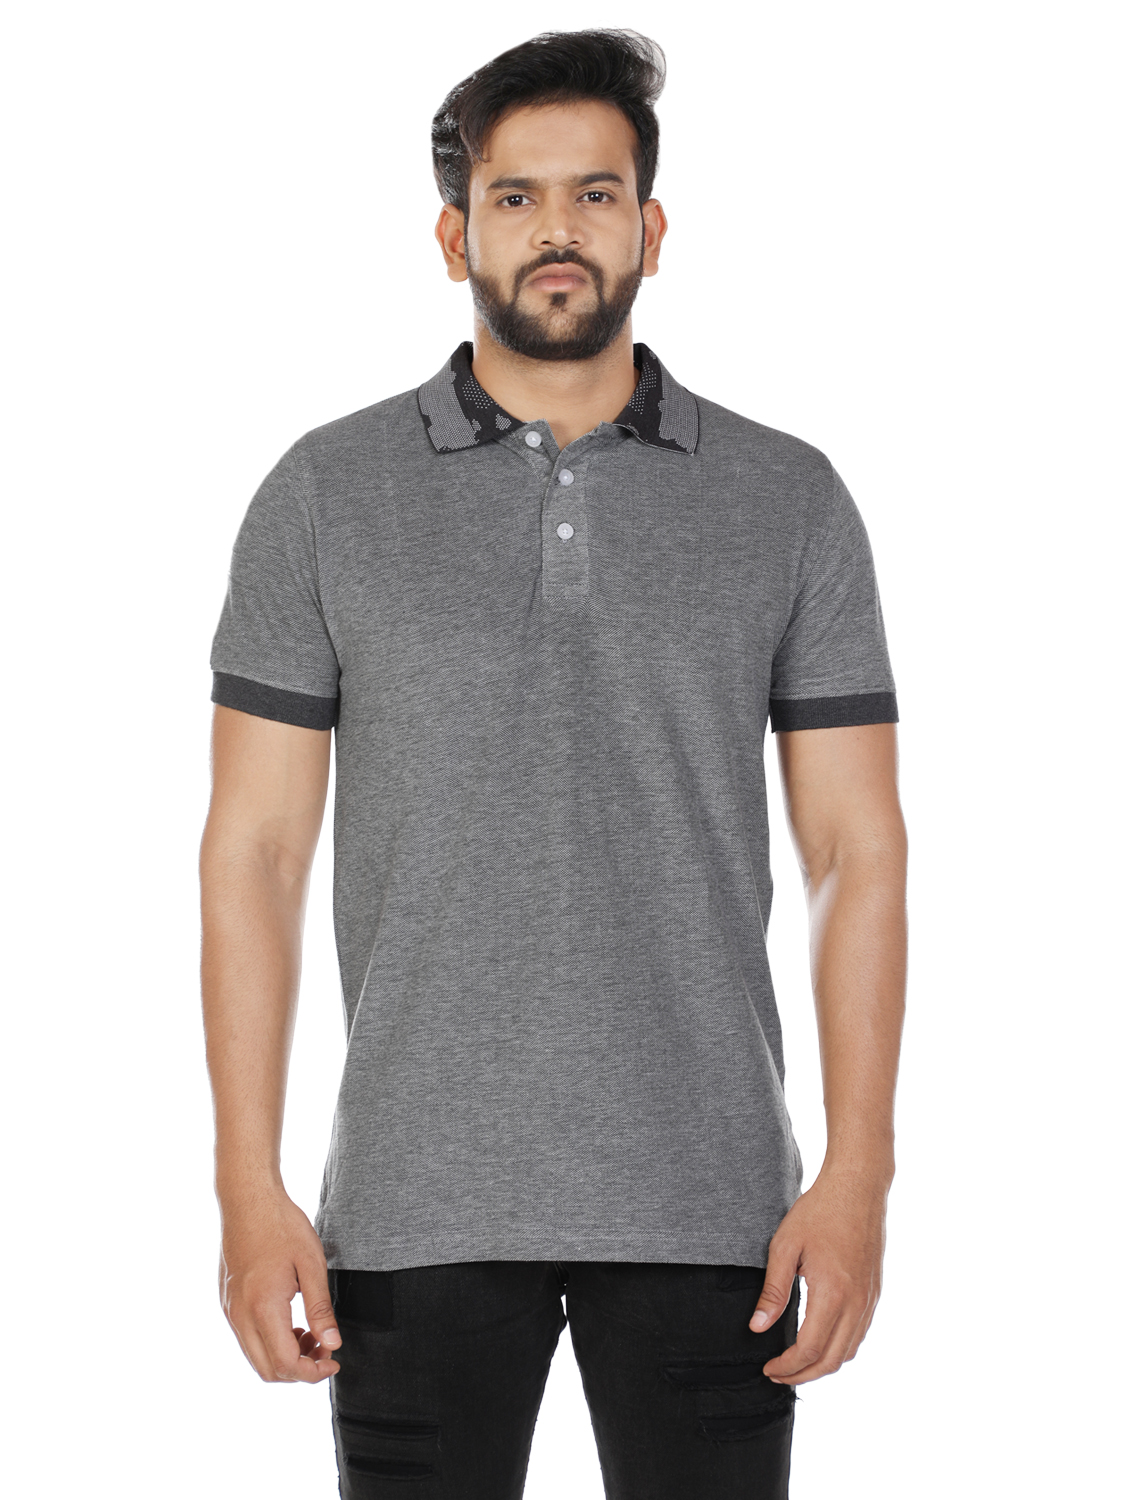 Buy Men's Grey Solid Polo T-Shirt Online @ ₹362 from ShopClues